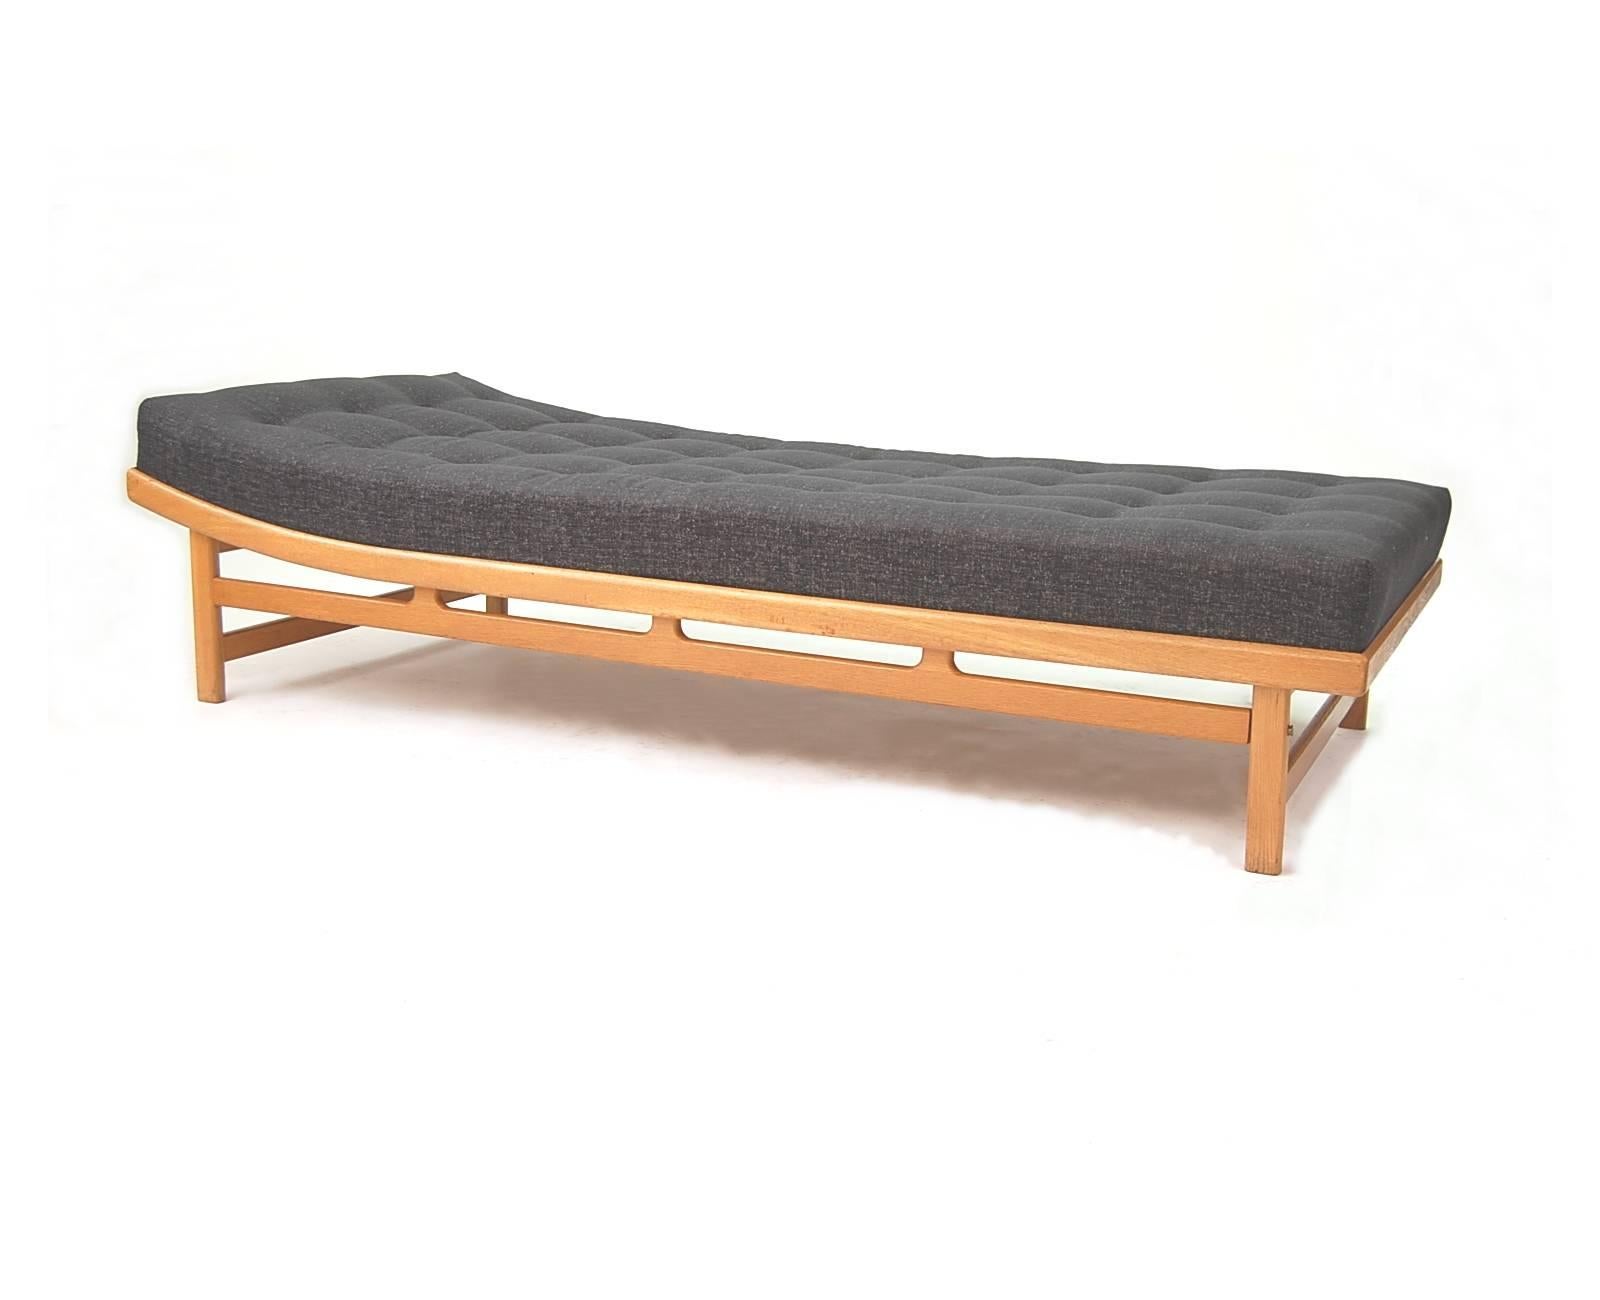 Danish modern daybed in oak, attributed to Børge Mogensen. The mattress has internal springs, much like a traditional mattress, so it provides exceptional support. Newly upholstered in a charcoal grey rayon poly mix (78.68 rayon . 21.32 poly .